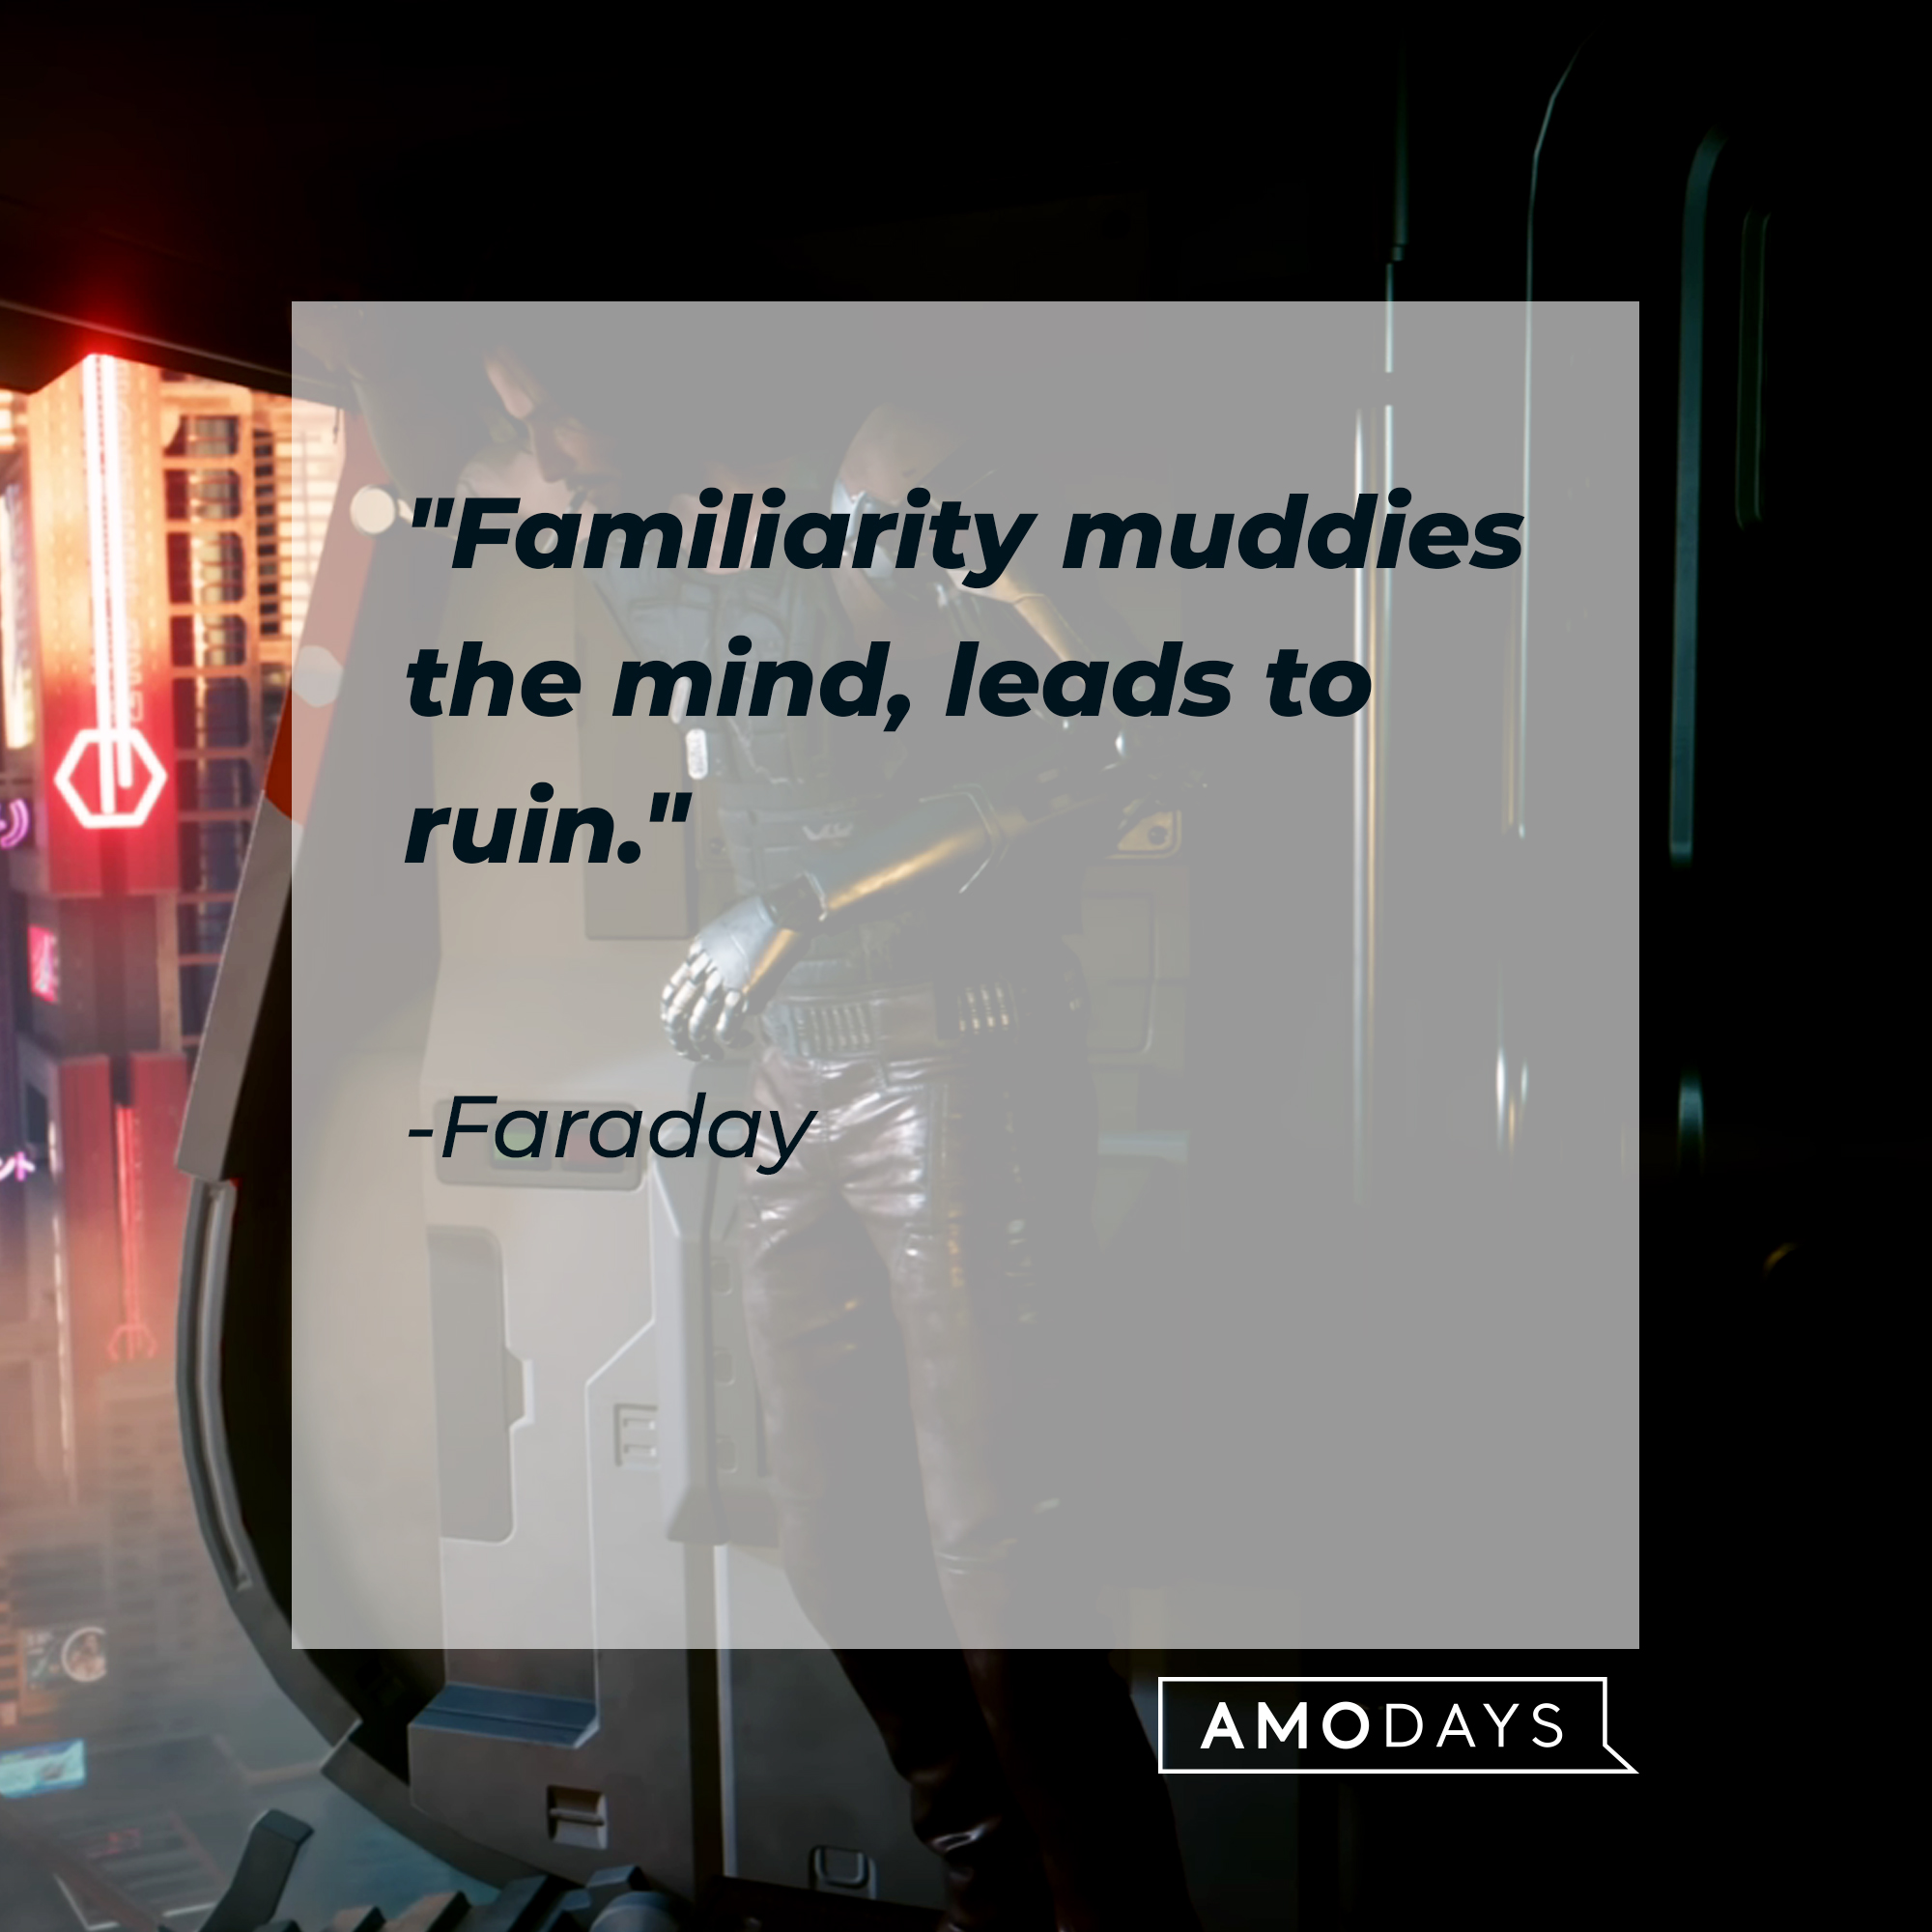 Faraday’s quote: "Familiarity muddies the mind, leads to ruin." | Source: Youtube.com/CyberpunkGame